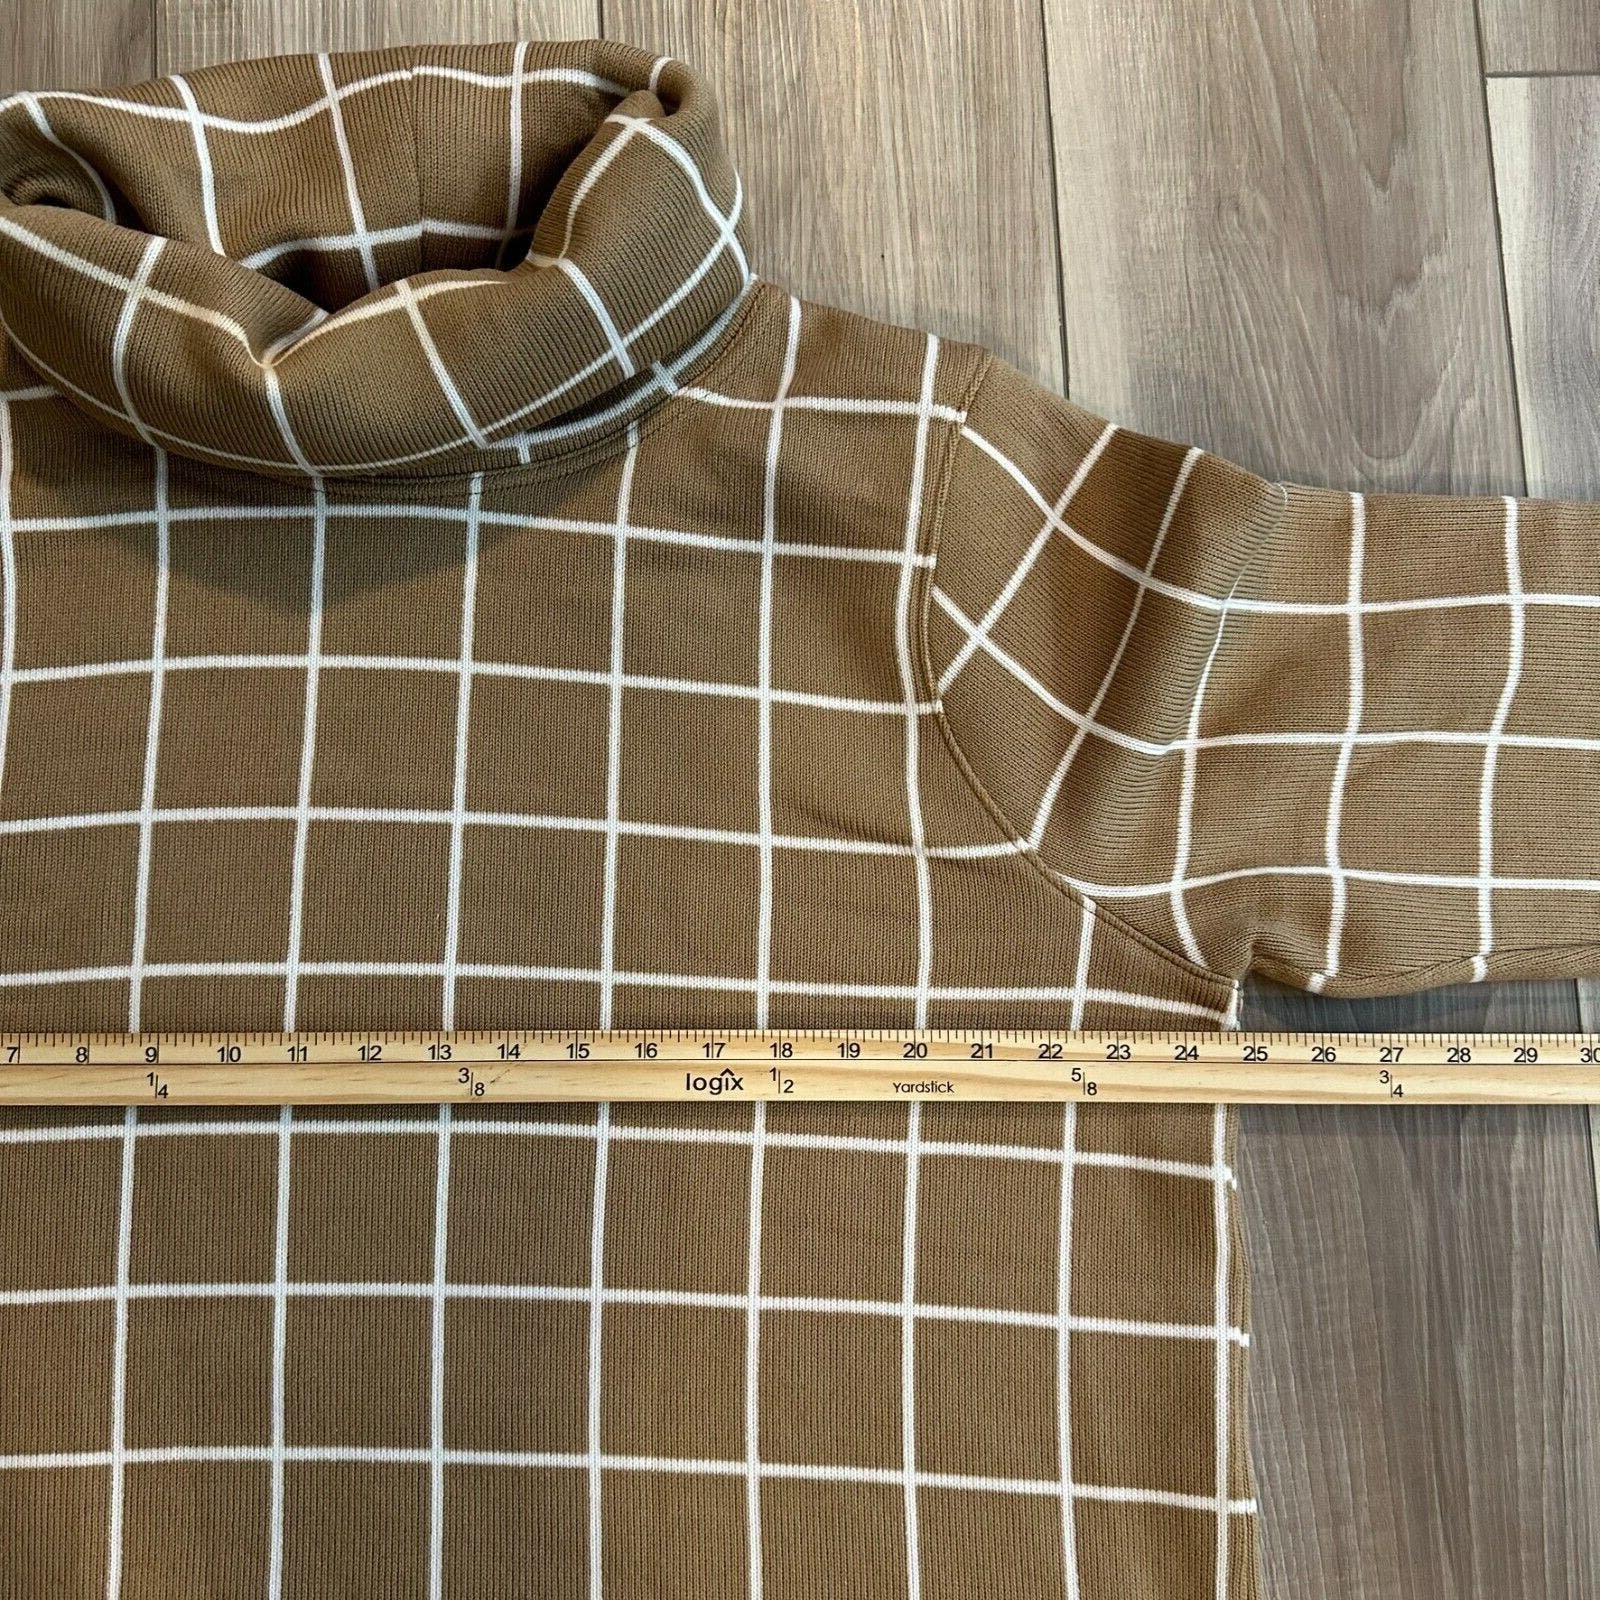 large selection J Crew Funnel Neck Sweater Camel Brown Plaid Womens 2X Cozy Cottagecore kNyCTBgGd well sale